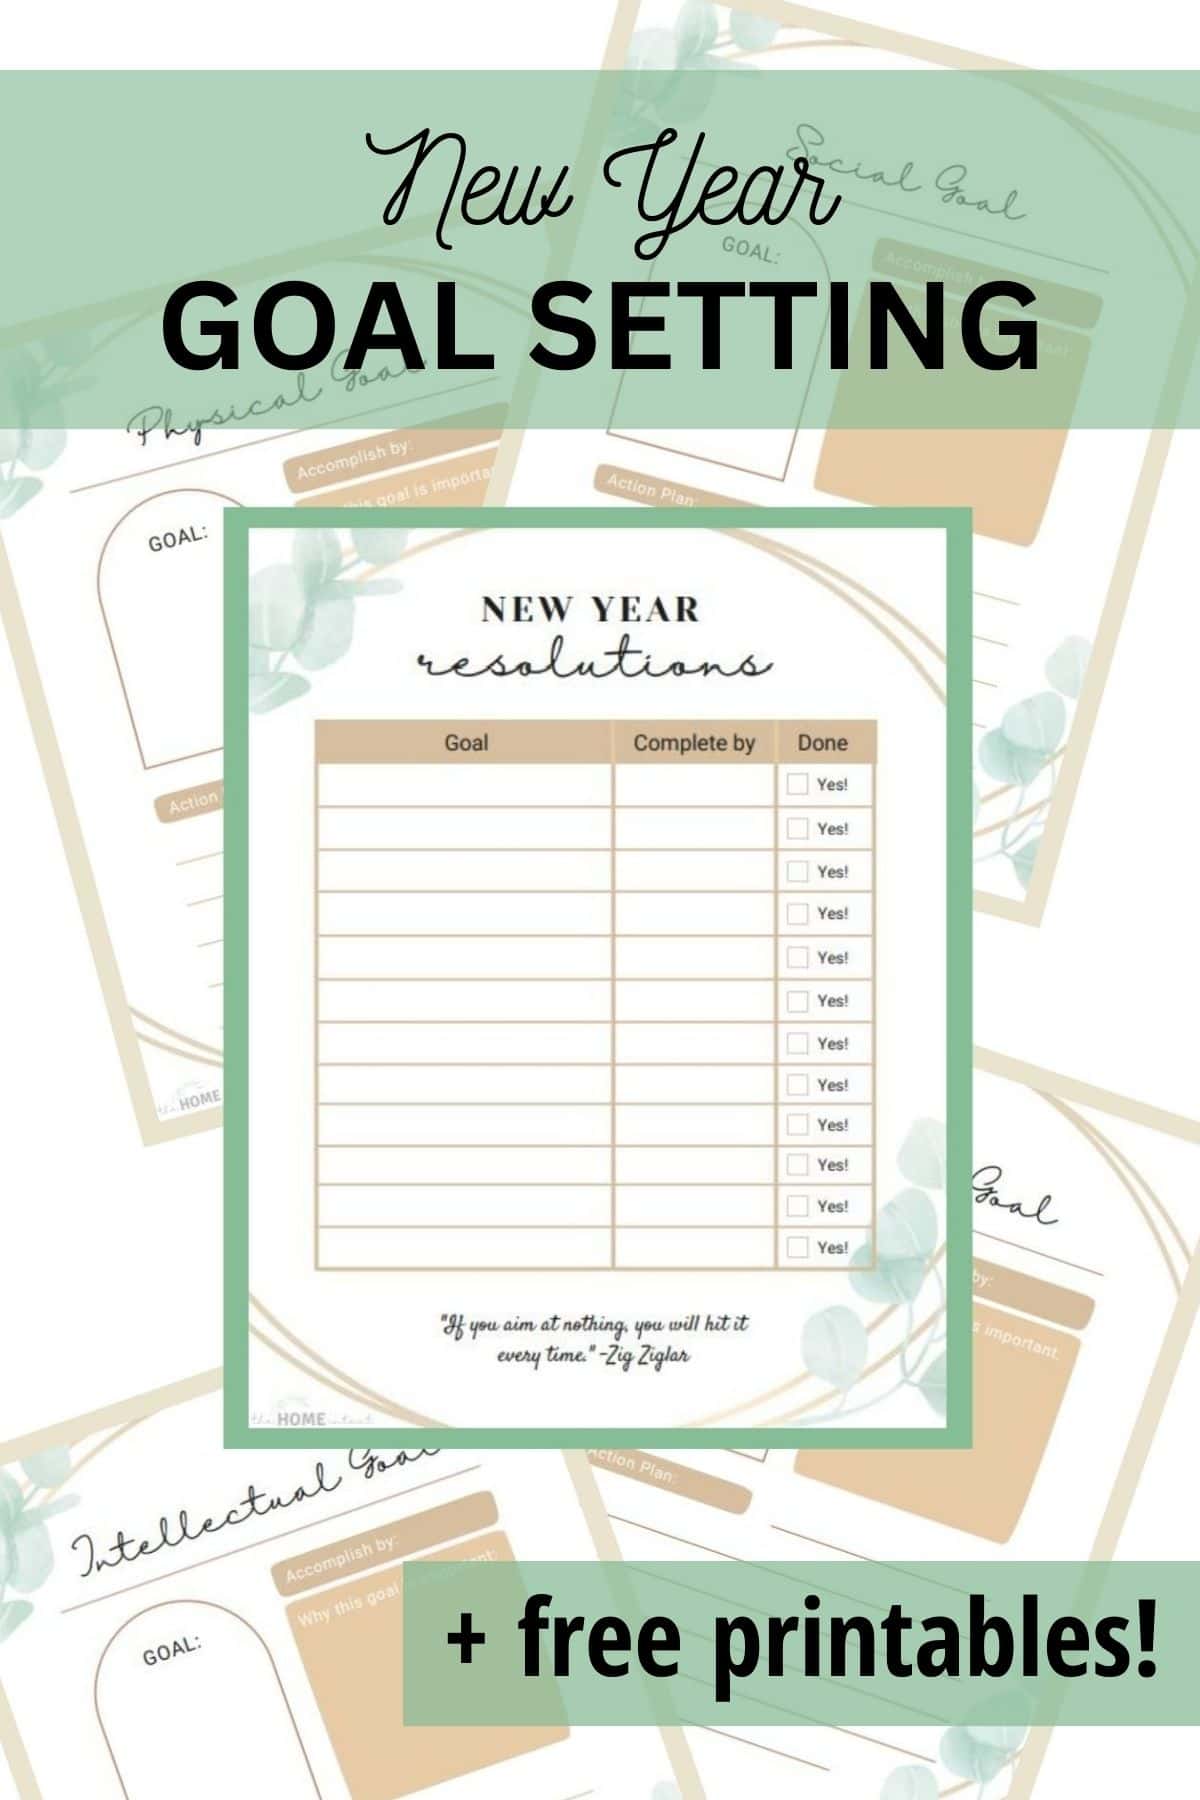 image showing new year goal worksheets